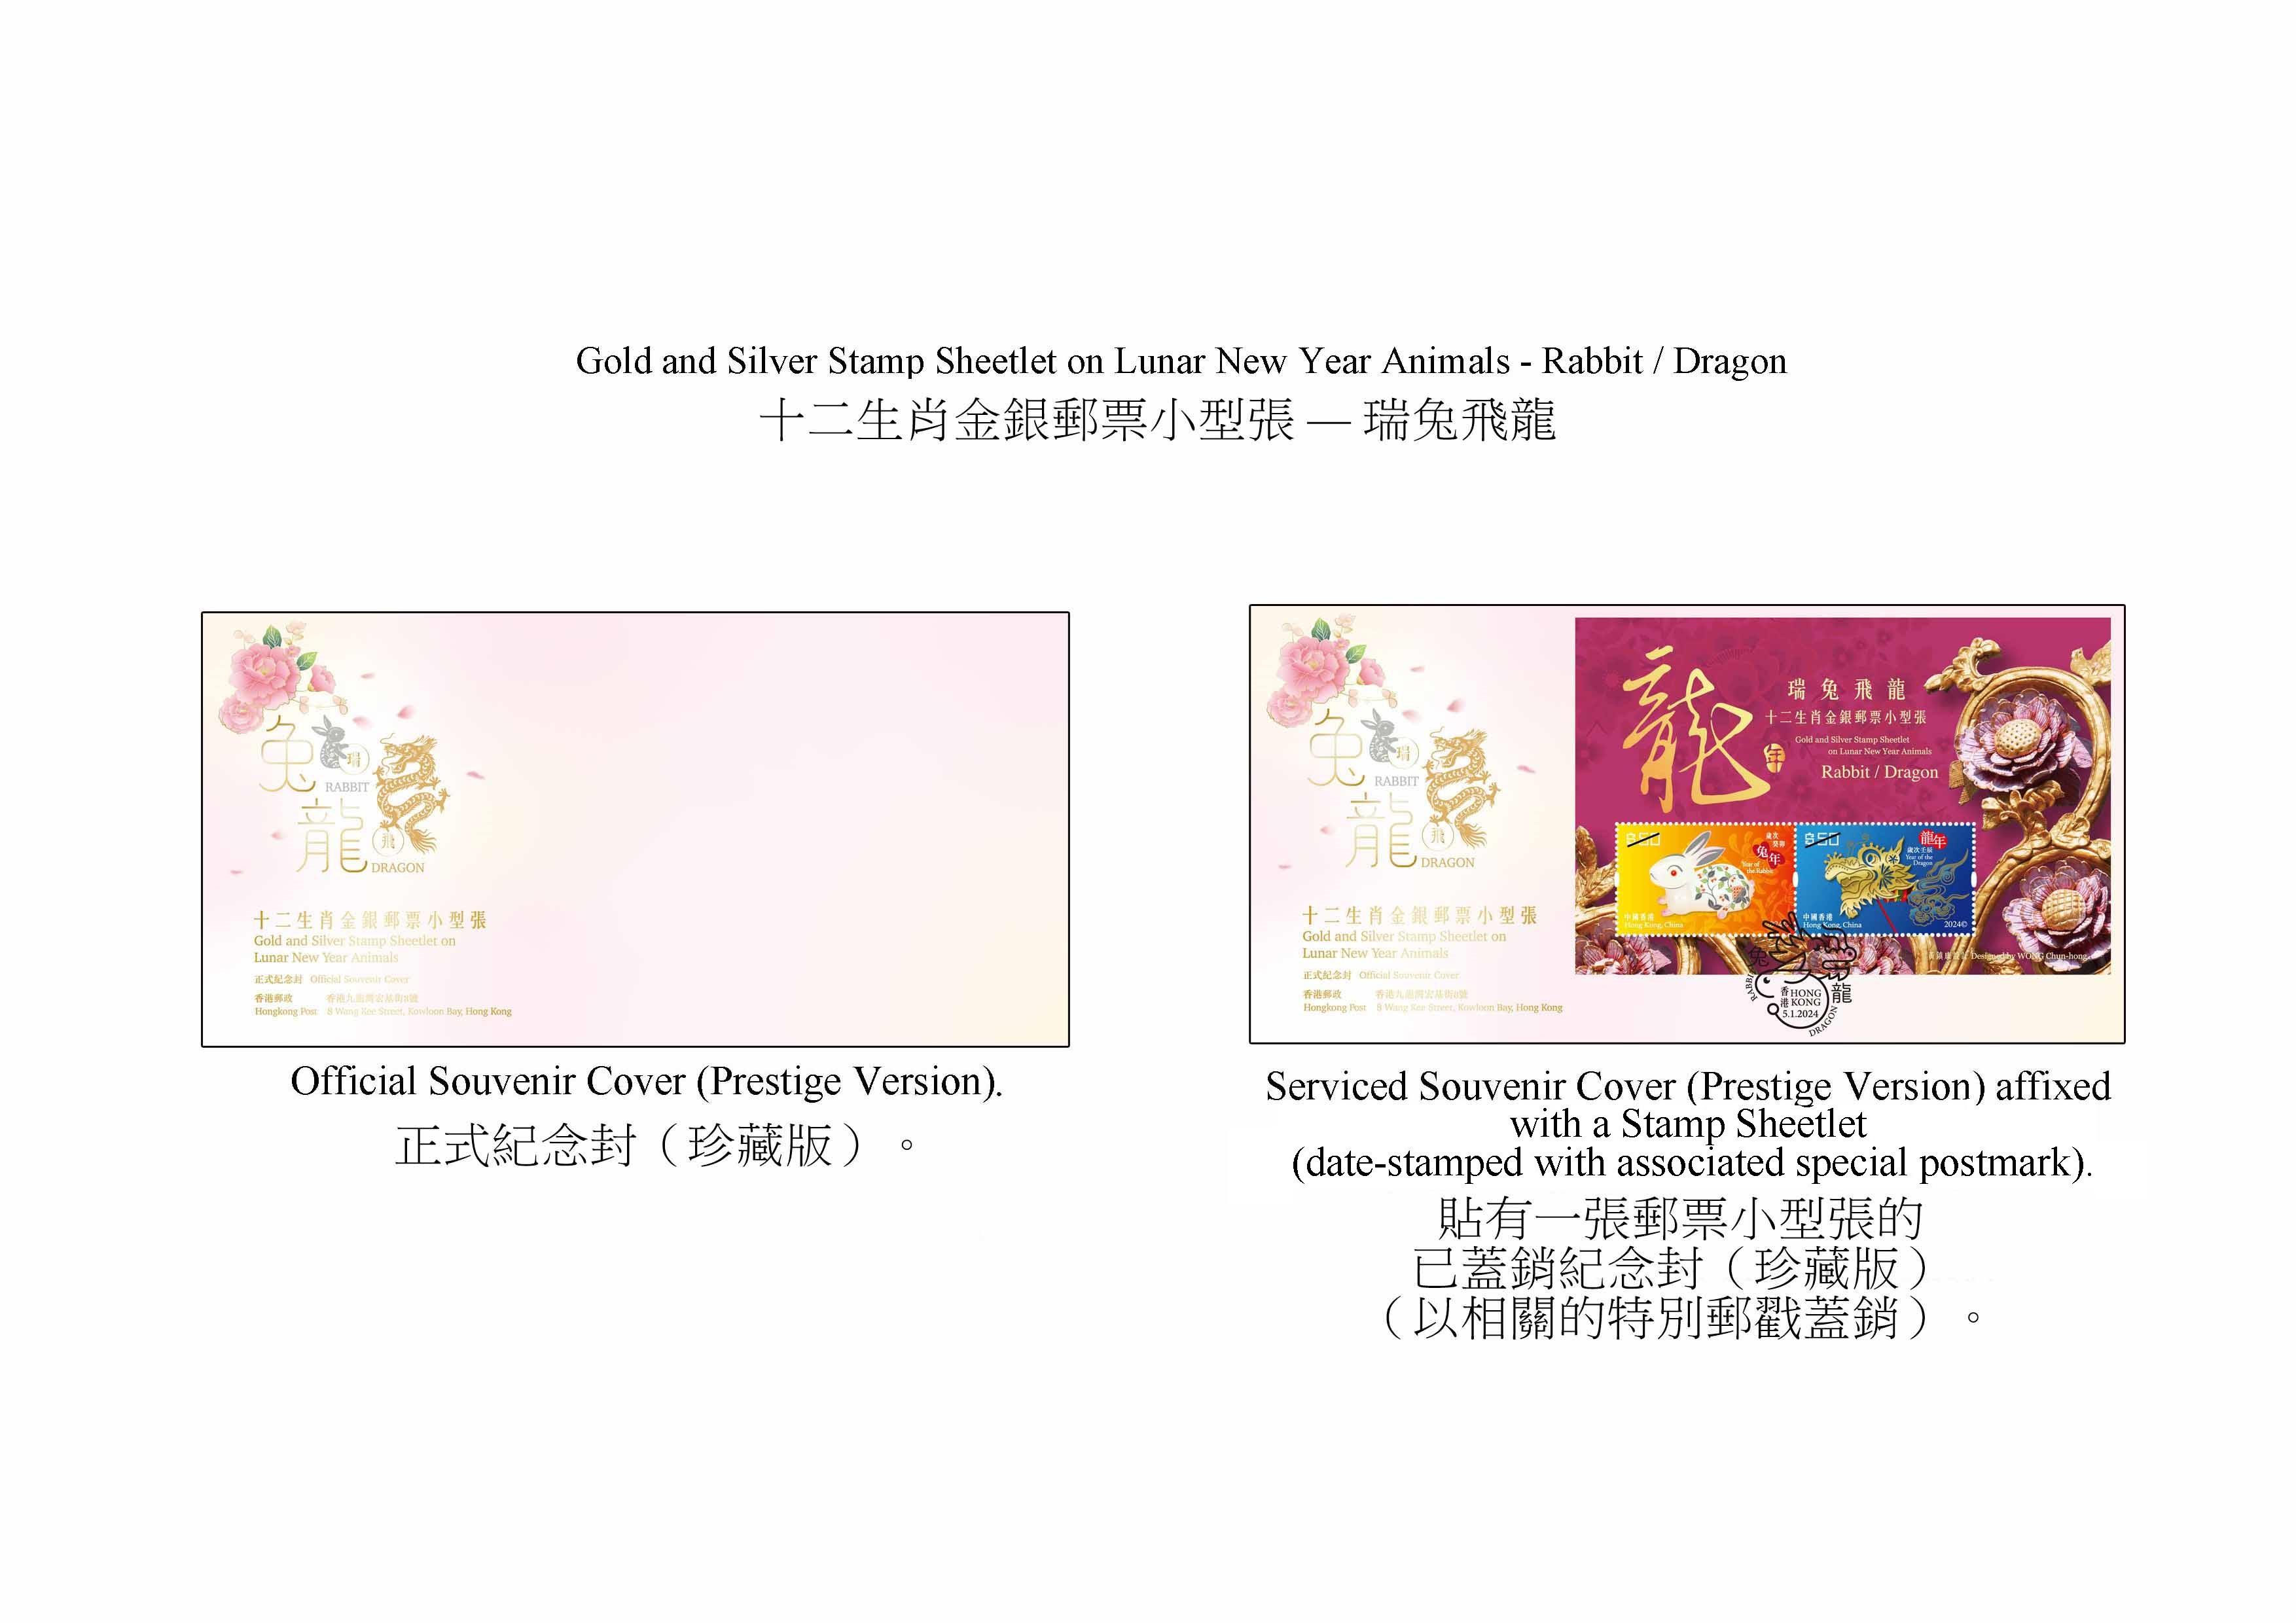 Hongkong Post will launch a special stamp issue and associated philatelic products on the theme of "Year of the Dragon" on January 5, 2024 (Friday). The "Gold and Silver Stamp Sheetlet on Lunar New Year Animals - Ribbit/Dragon" will also be launched on the same day. Photos show the souvenir covers (prestige version).
